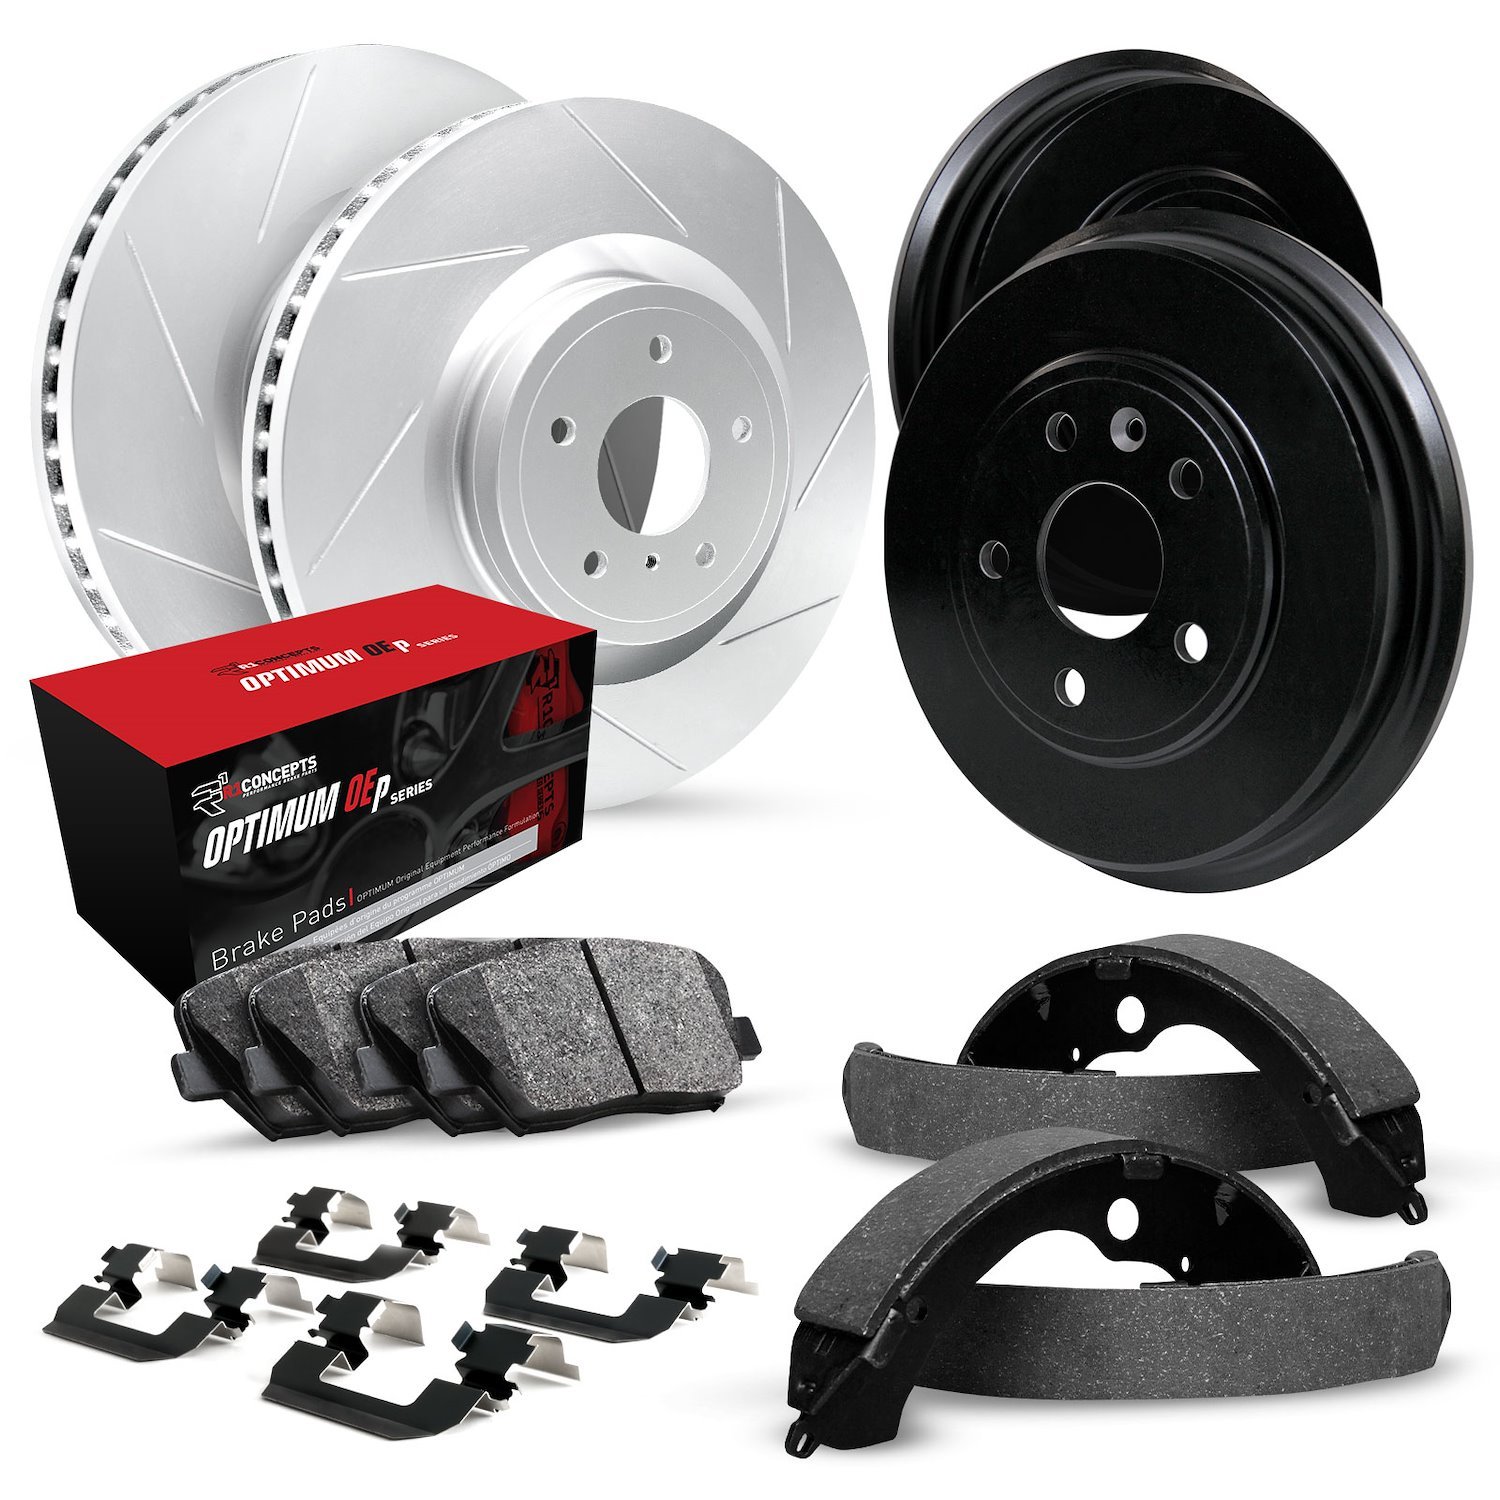 GEO-Carbon Slotted Brake Rotor & Drum Set w/Optimum OE Pads, Shoes, & Hardware, 2003-2005 GM, Position: Front & Rear